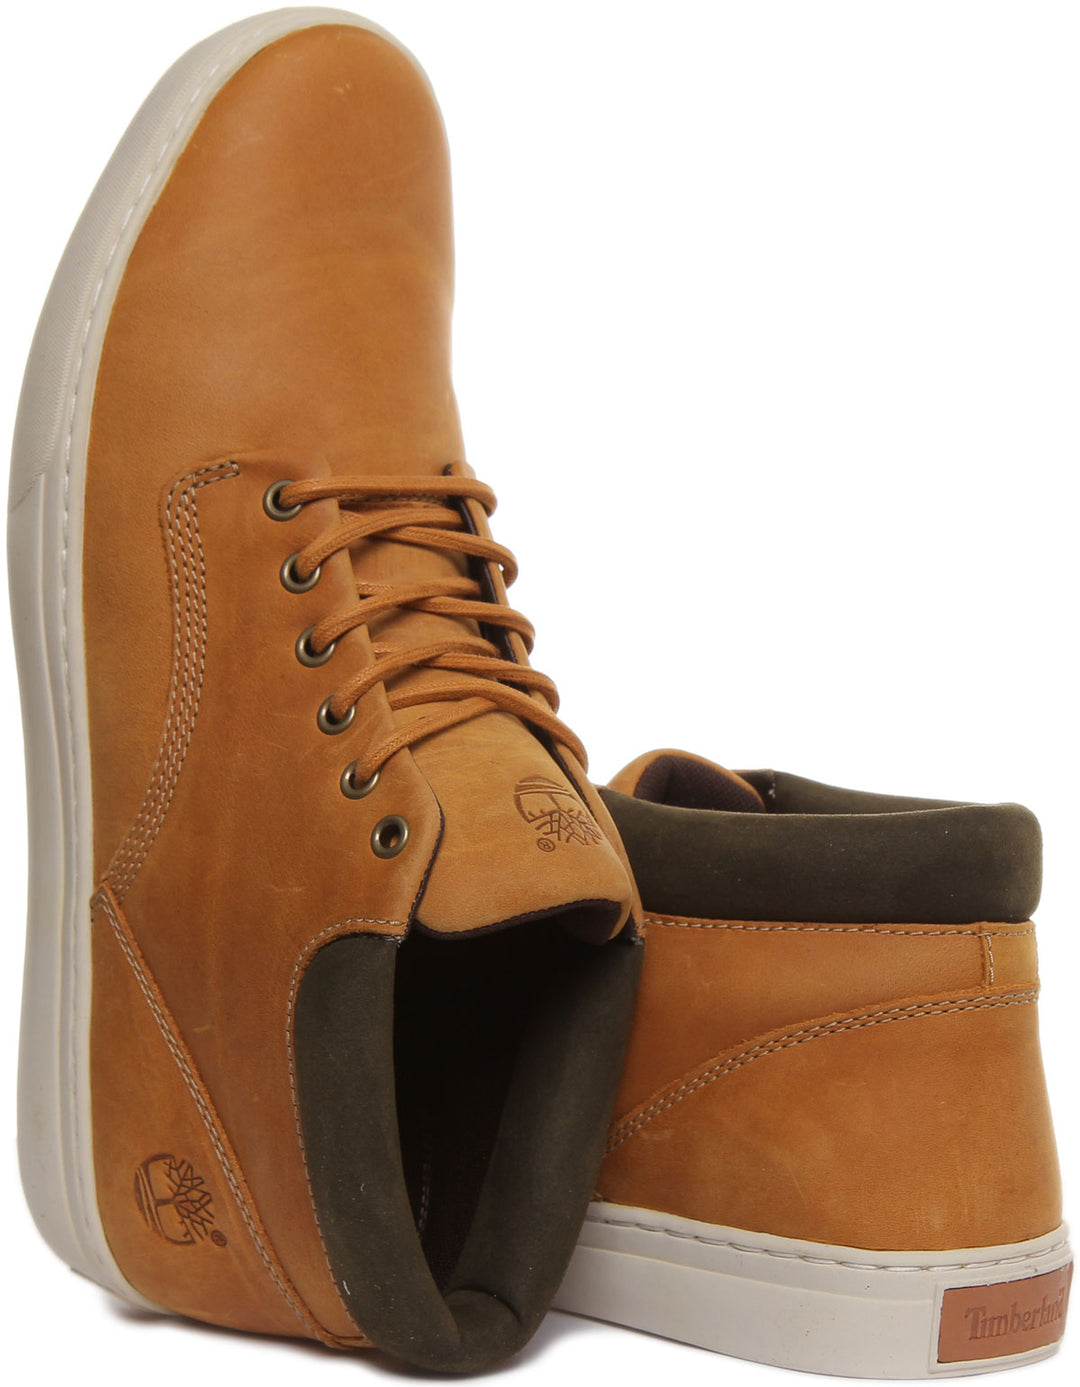 Timberland A1Ju1 In Wheat For Men